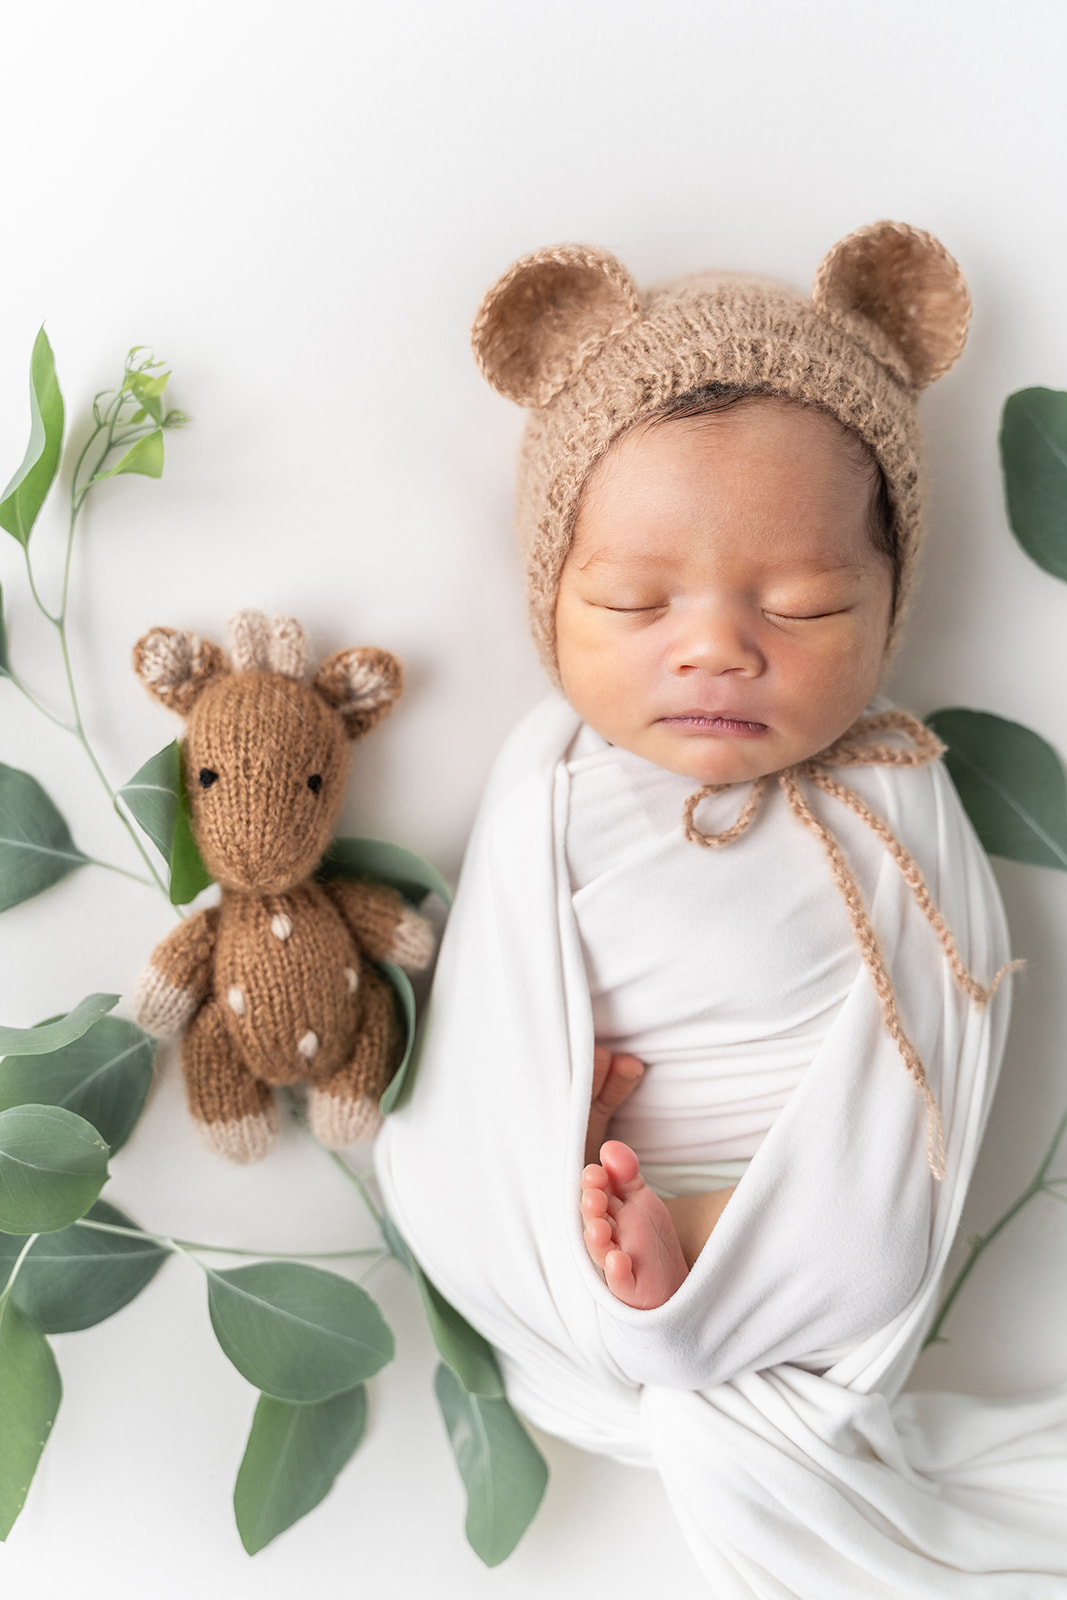 A newborn baby sleeps with a knit giraffe in a brown bonnet with ears